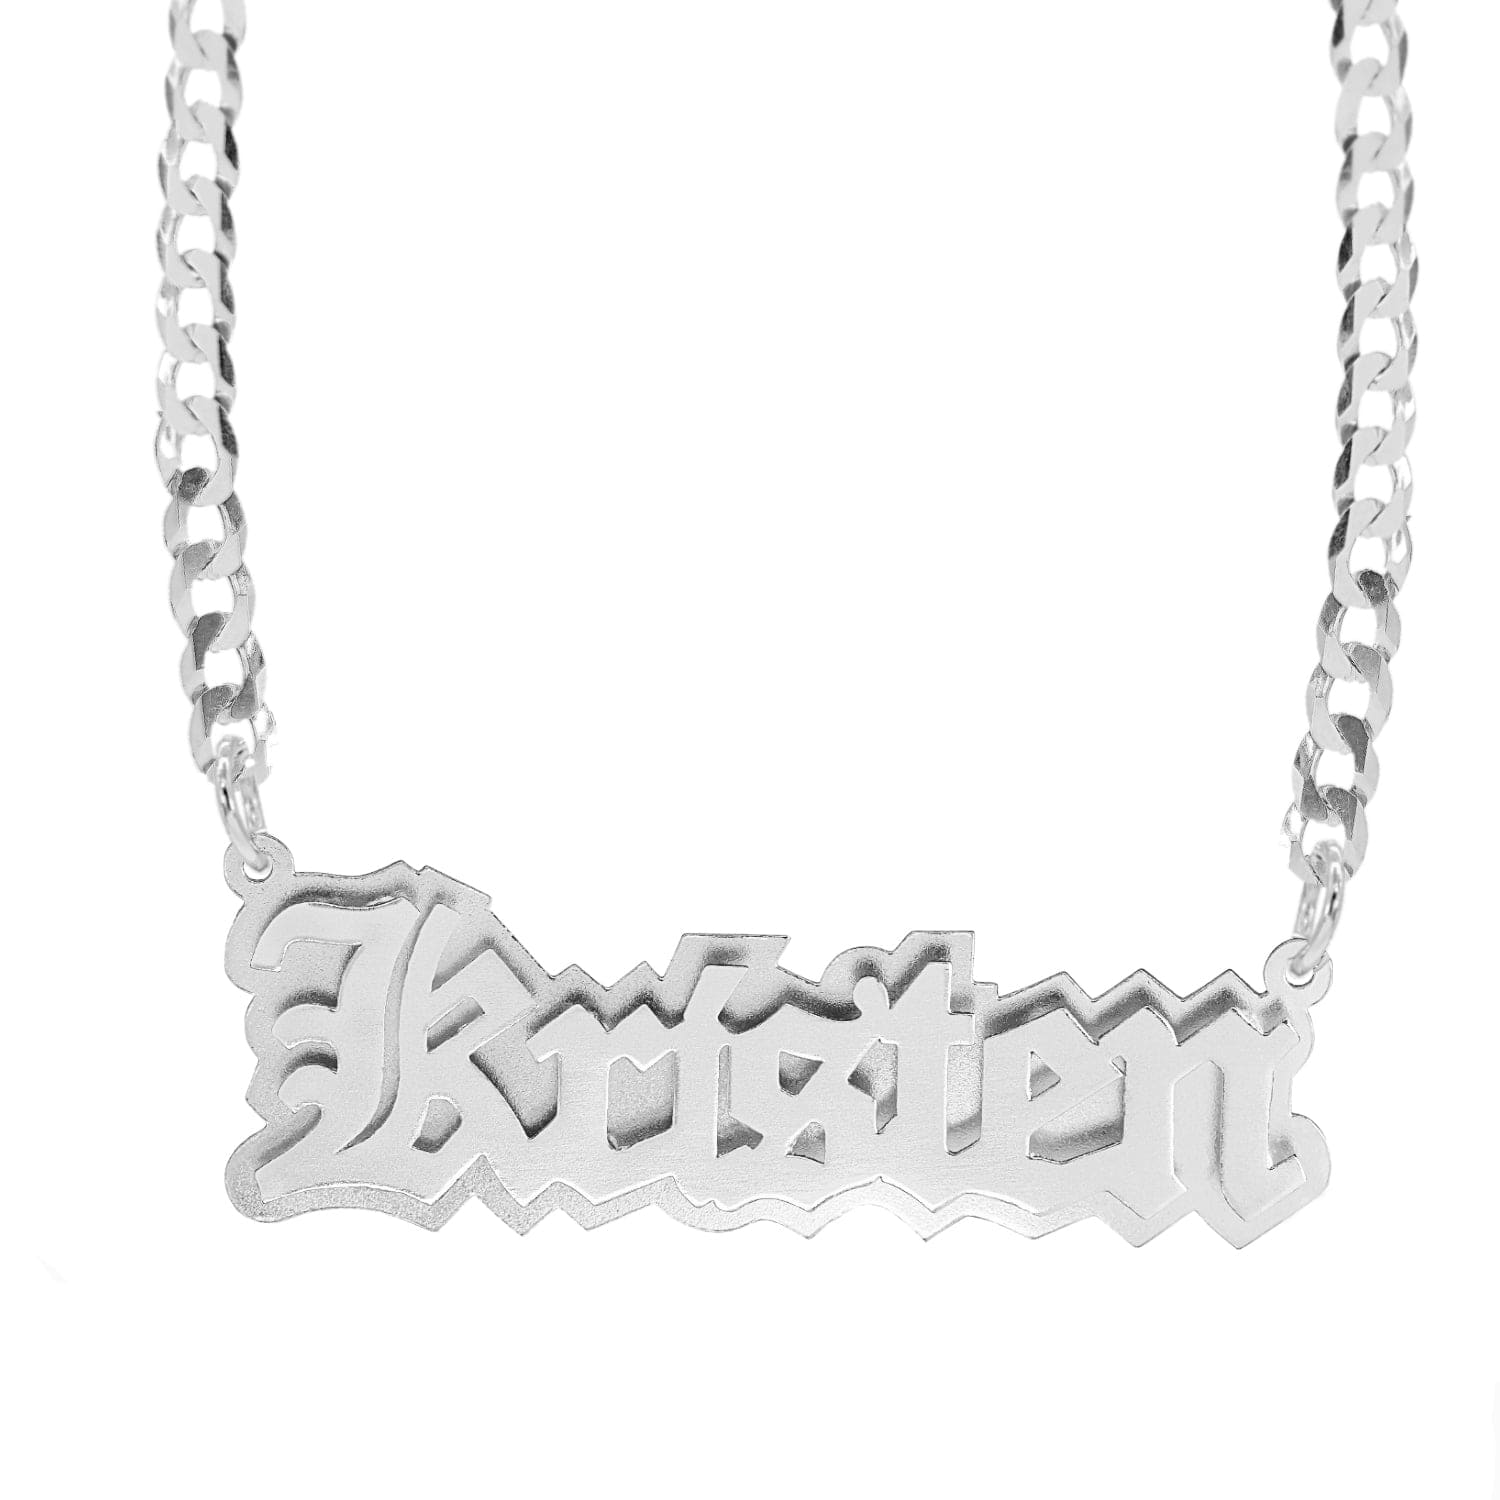 14k Gold over Sterling Silver / Cuban Chain Double Plated Nameplate Necklace "Kristen" With Cuban Chain